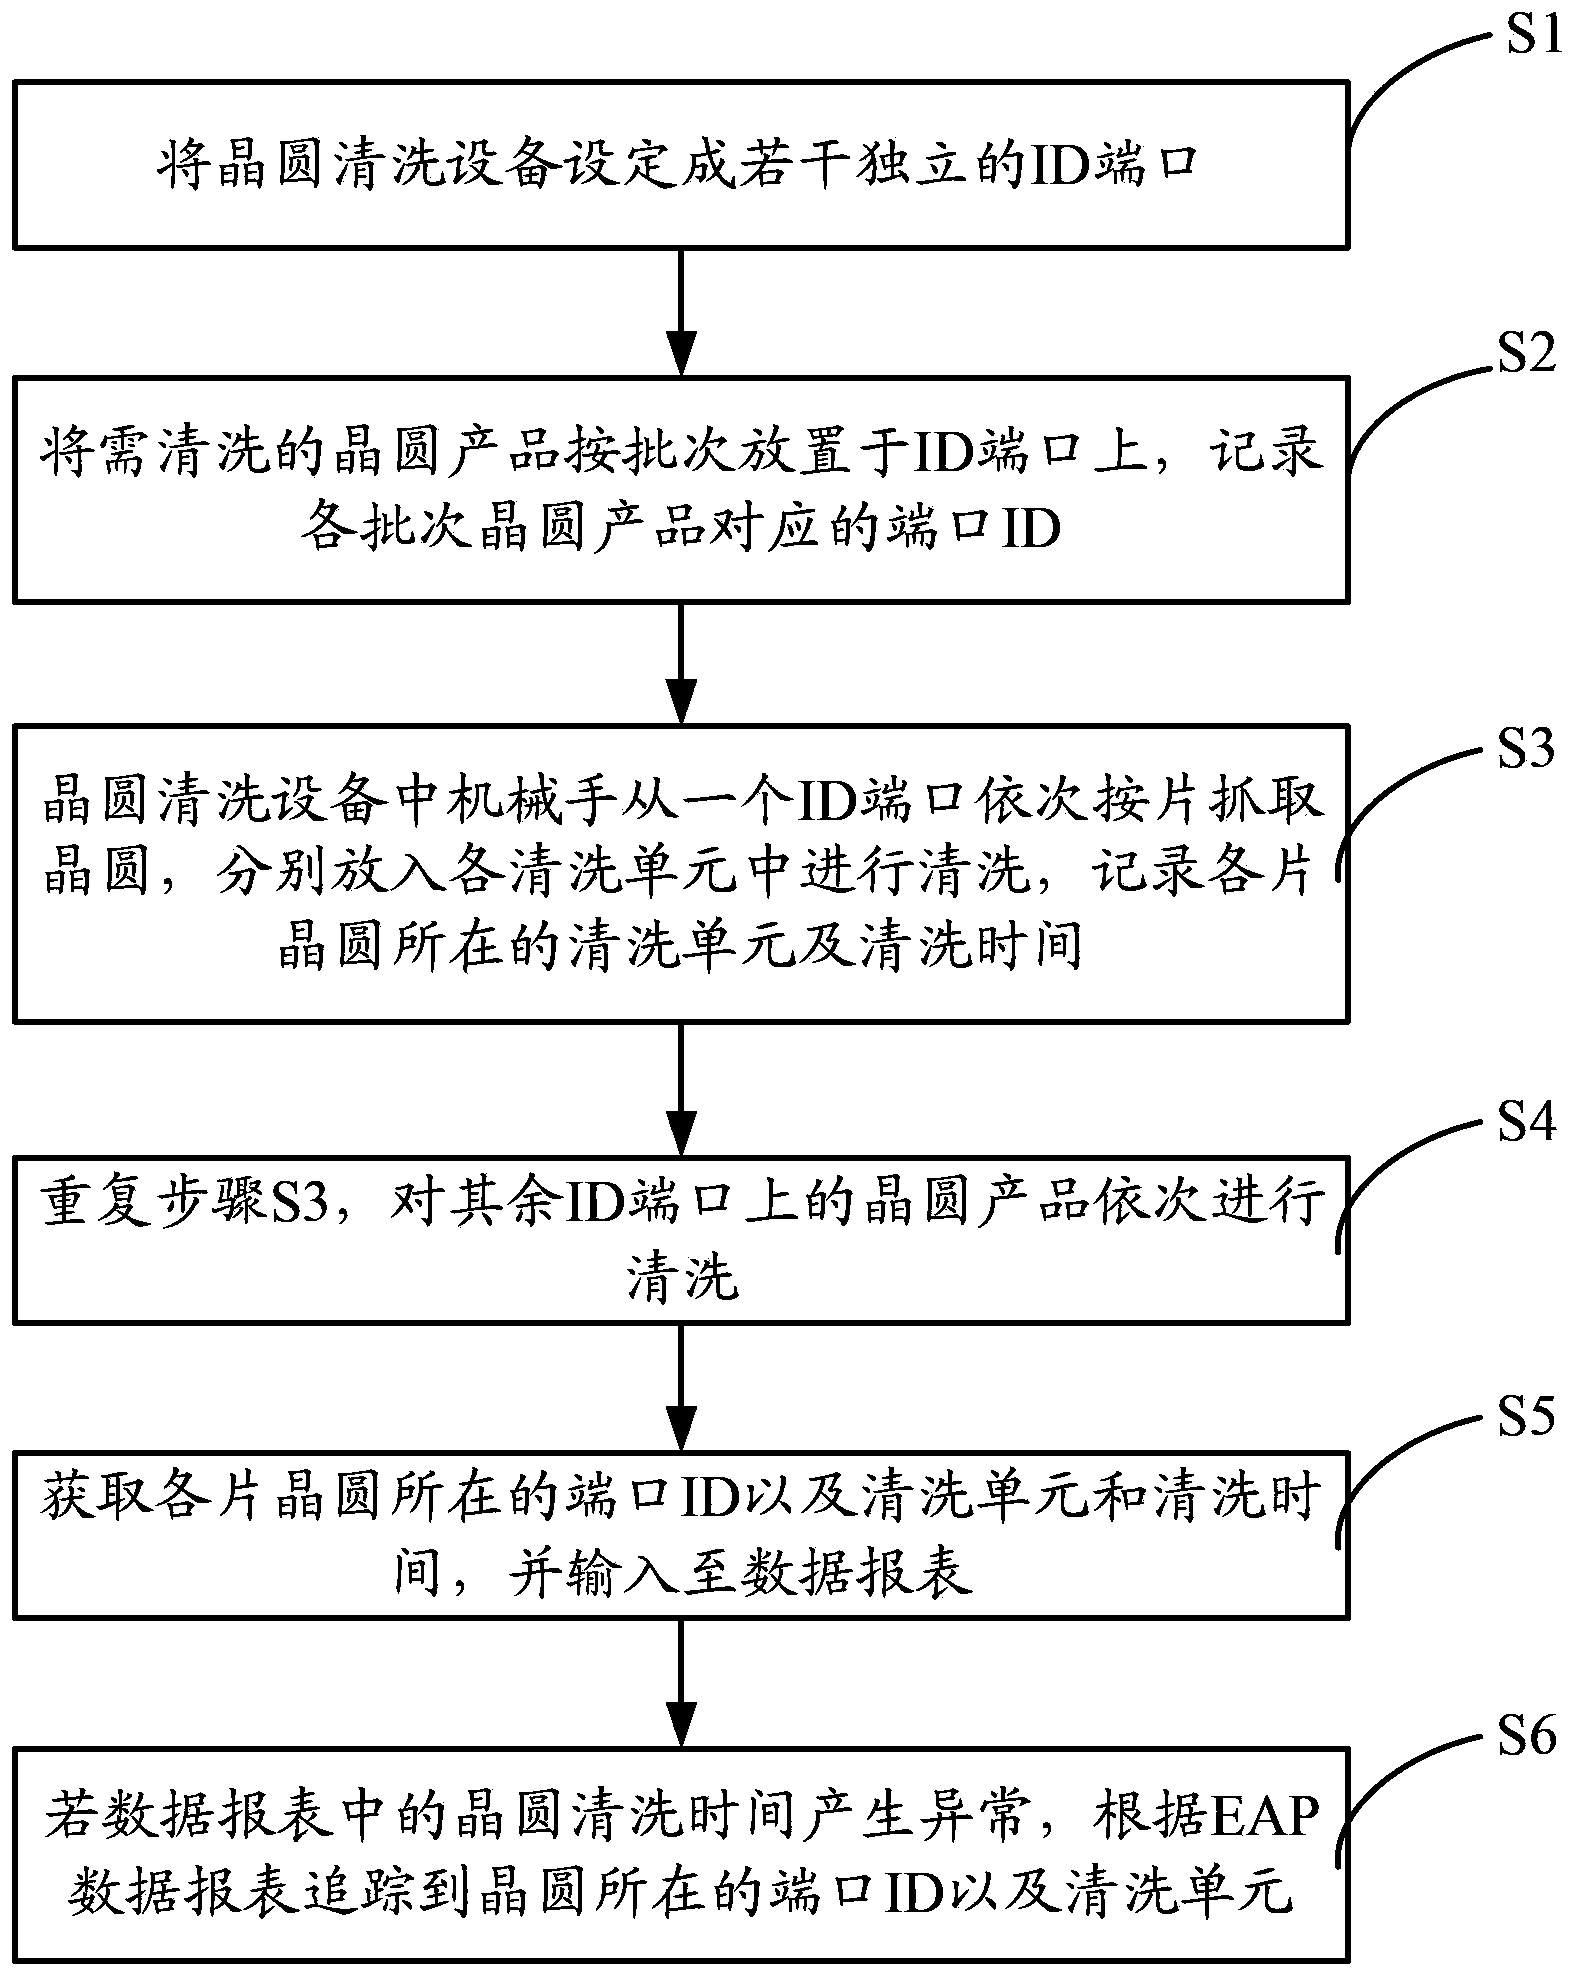 Wafer cleaning equipment-based product tracking method and system